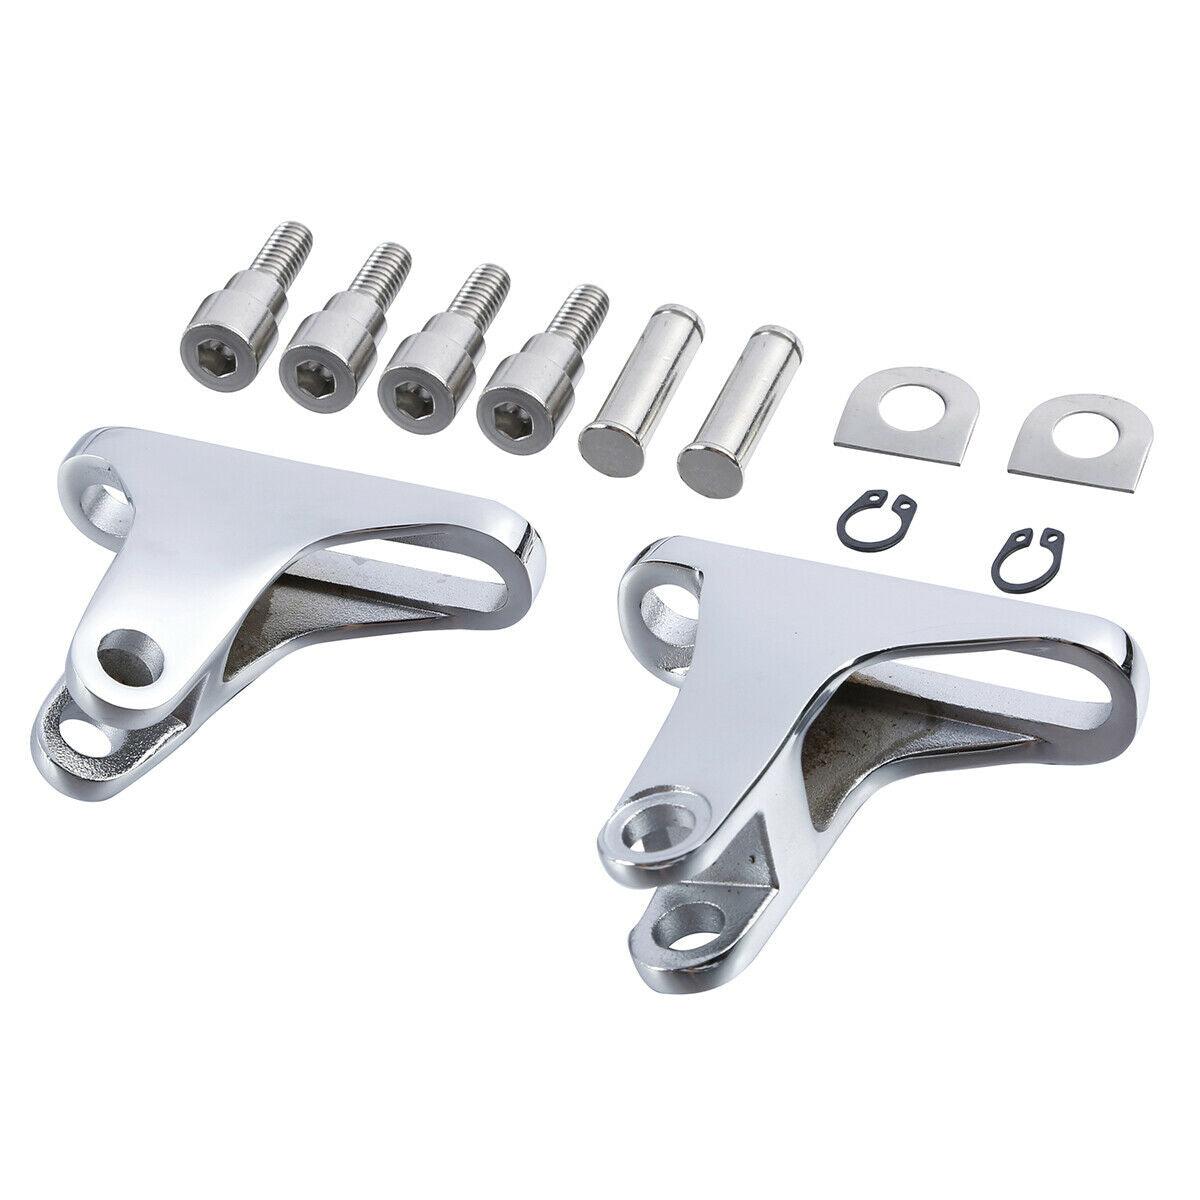 Chrome Rear Passenger Foot Pegs Mount Fit For Harley Electra Road Glide 93-21 18 - Moto Life Products